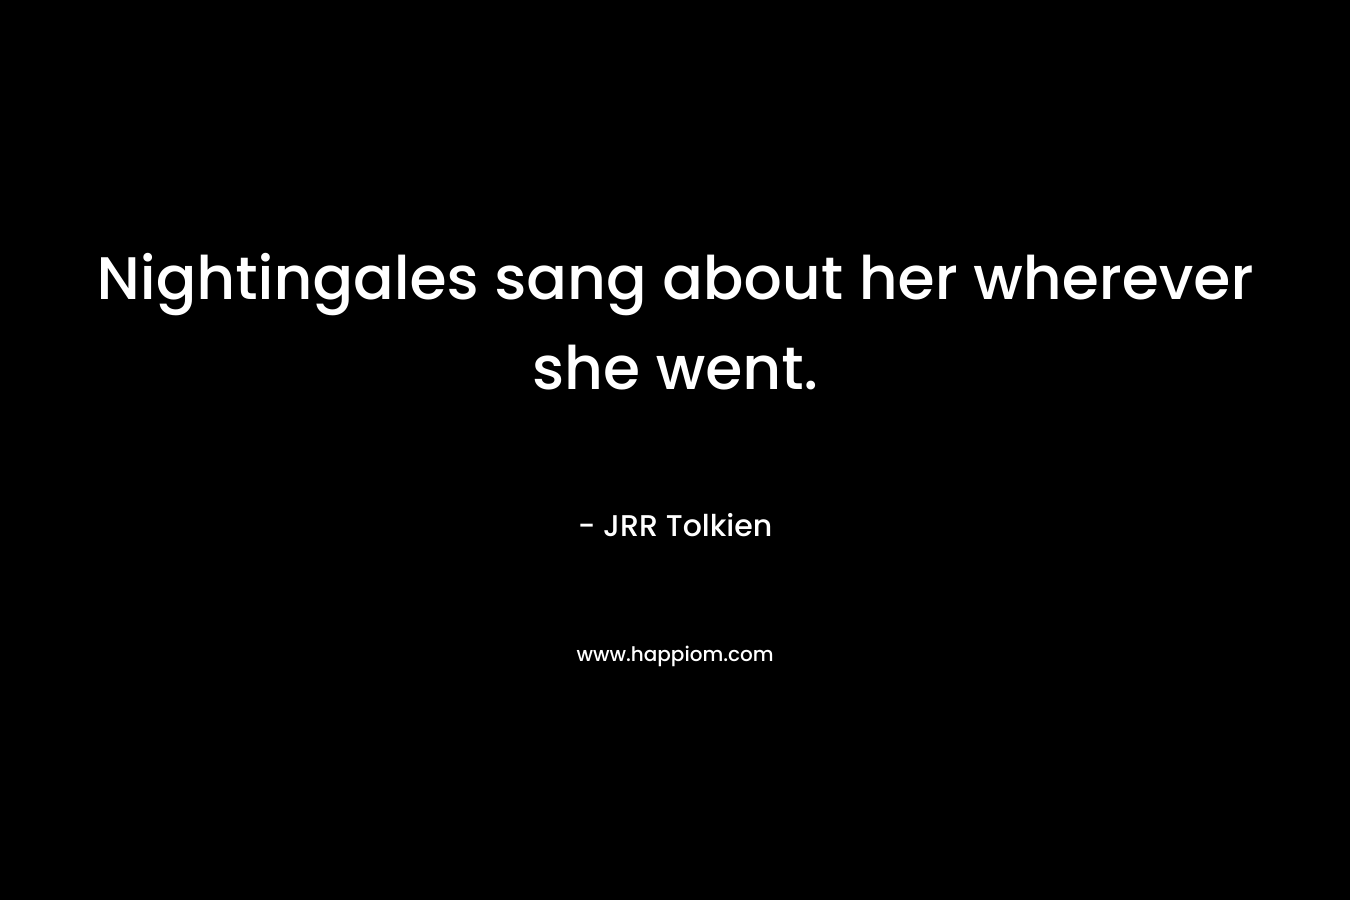 Nightingales sang about her wherever she went. – JRR Tolkien